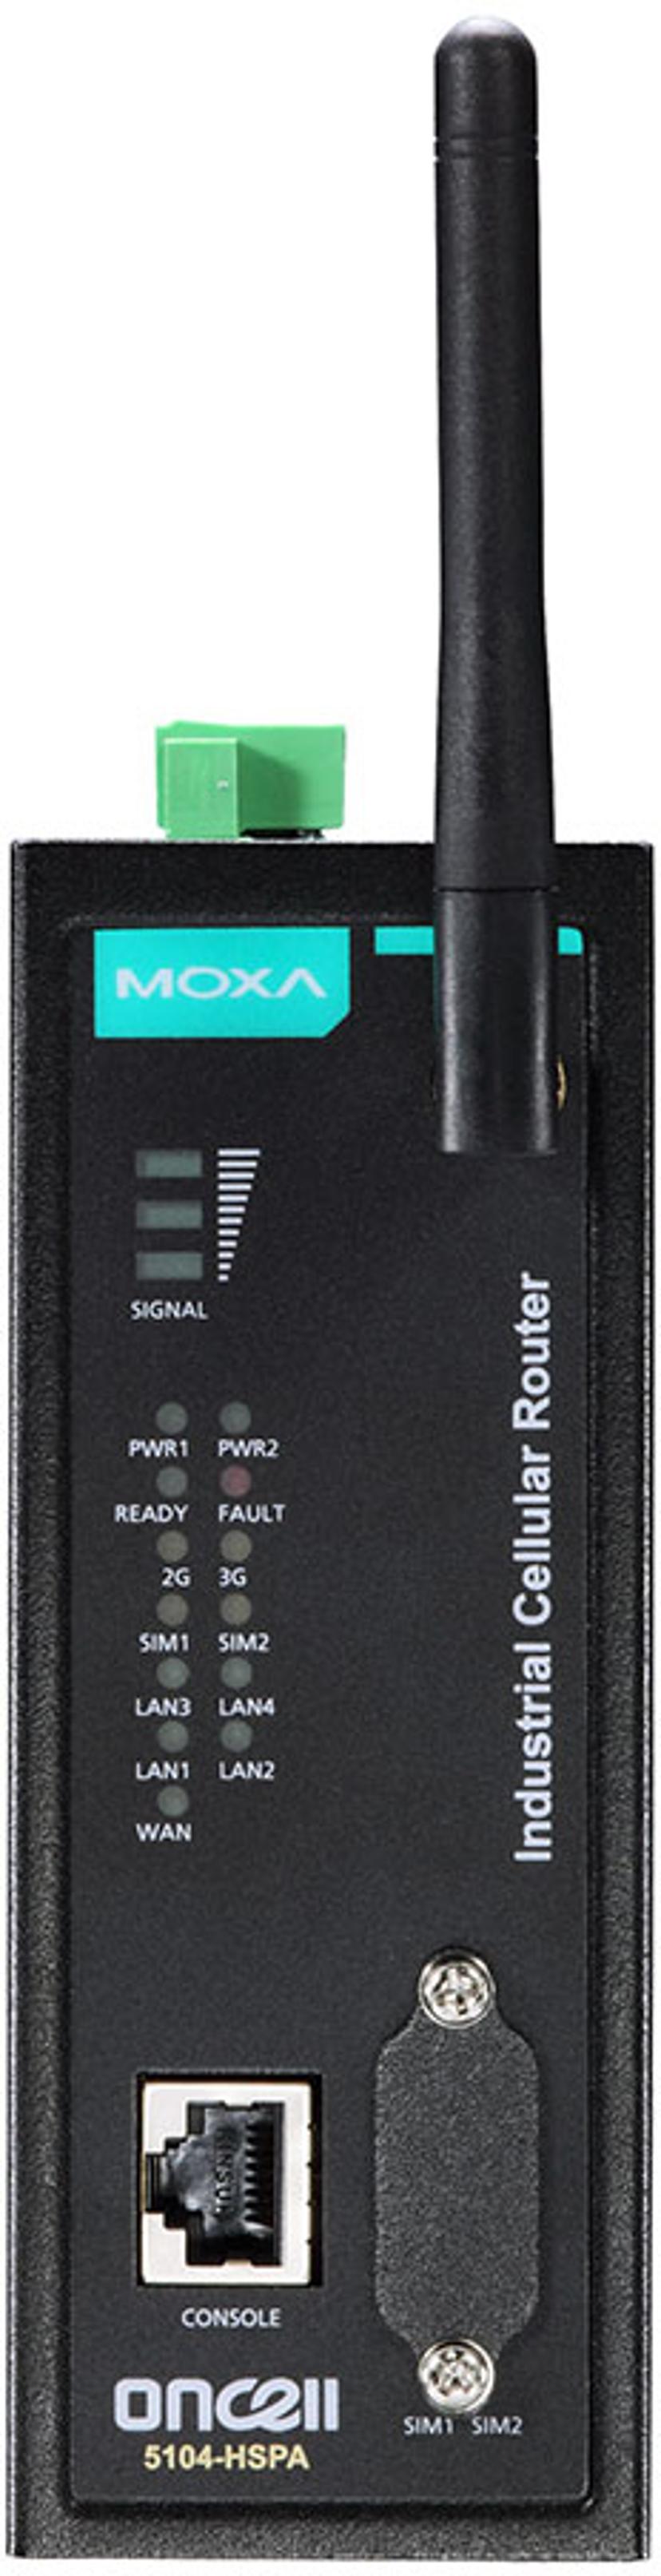 Moxa OnCell 5104-HSPA Industriell 3G Router Extrem Temp